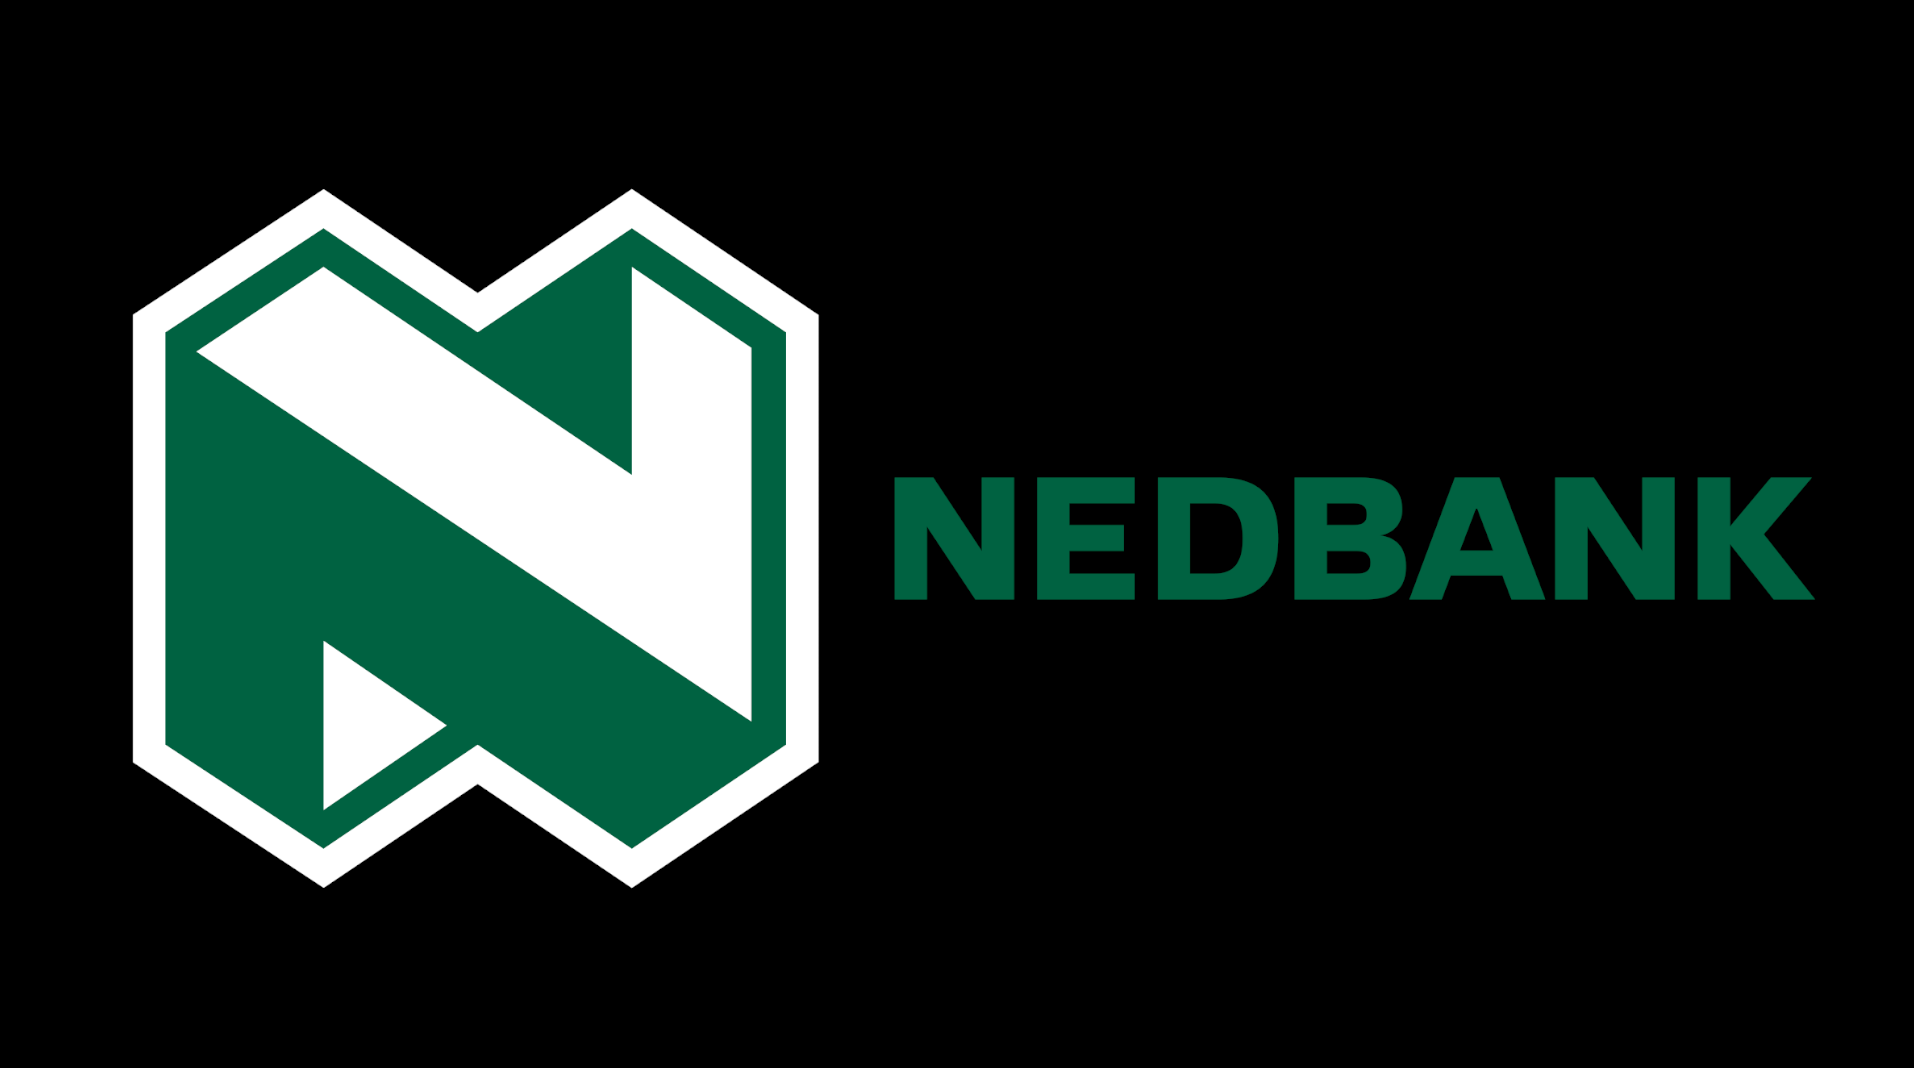 Nedbank pioneers and launches contactless payment solution.